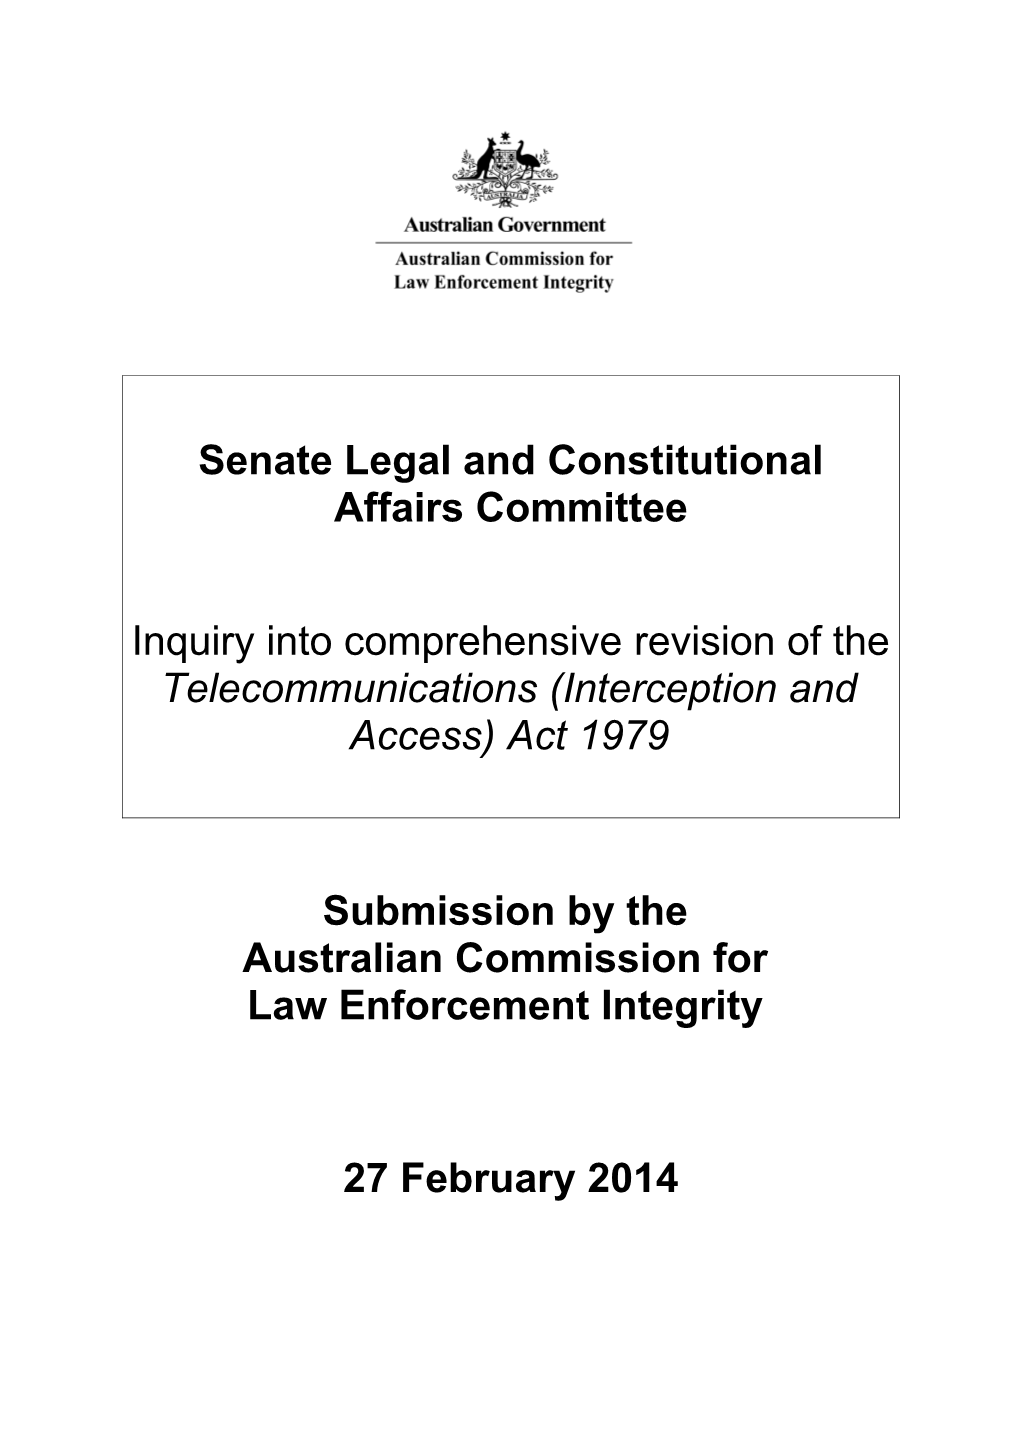 ACLEI Submission to Senate Legal and Constitutional Affairs Committee on TIA Act Revision